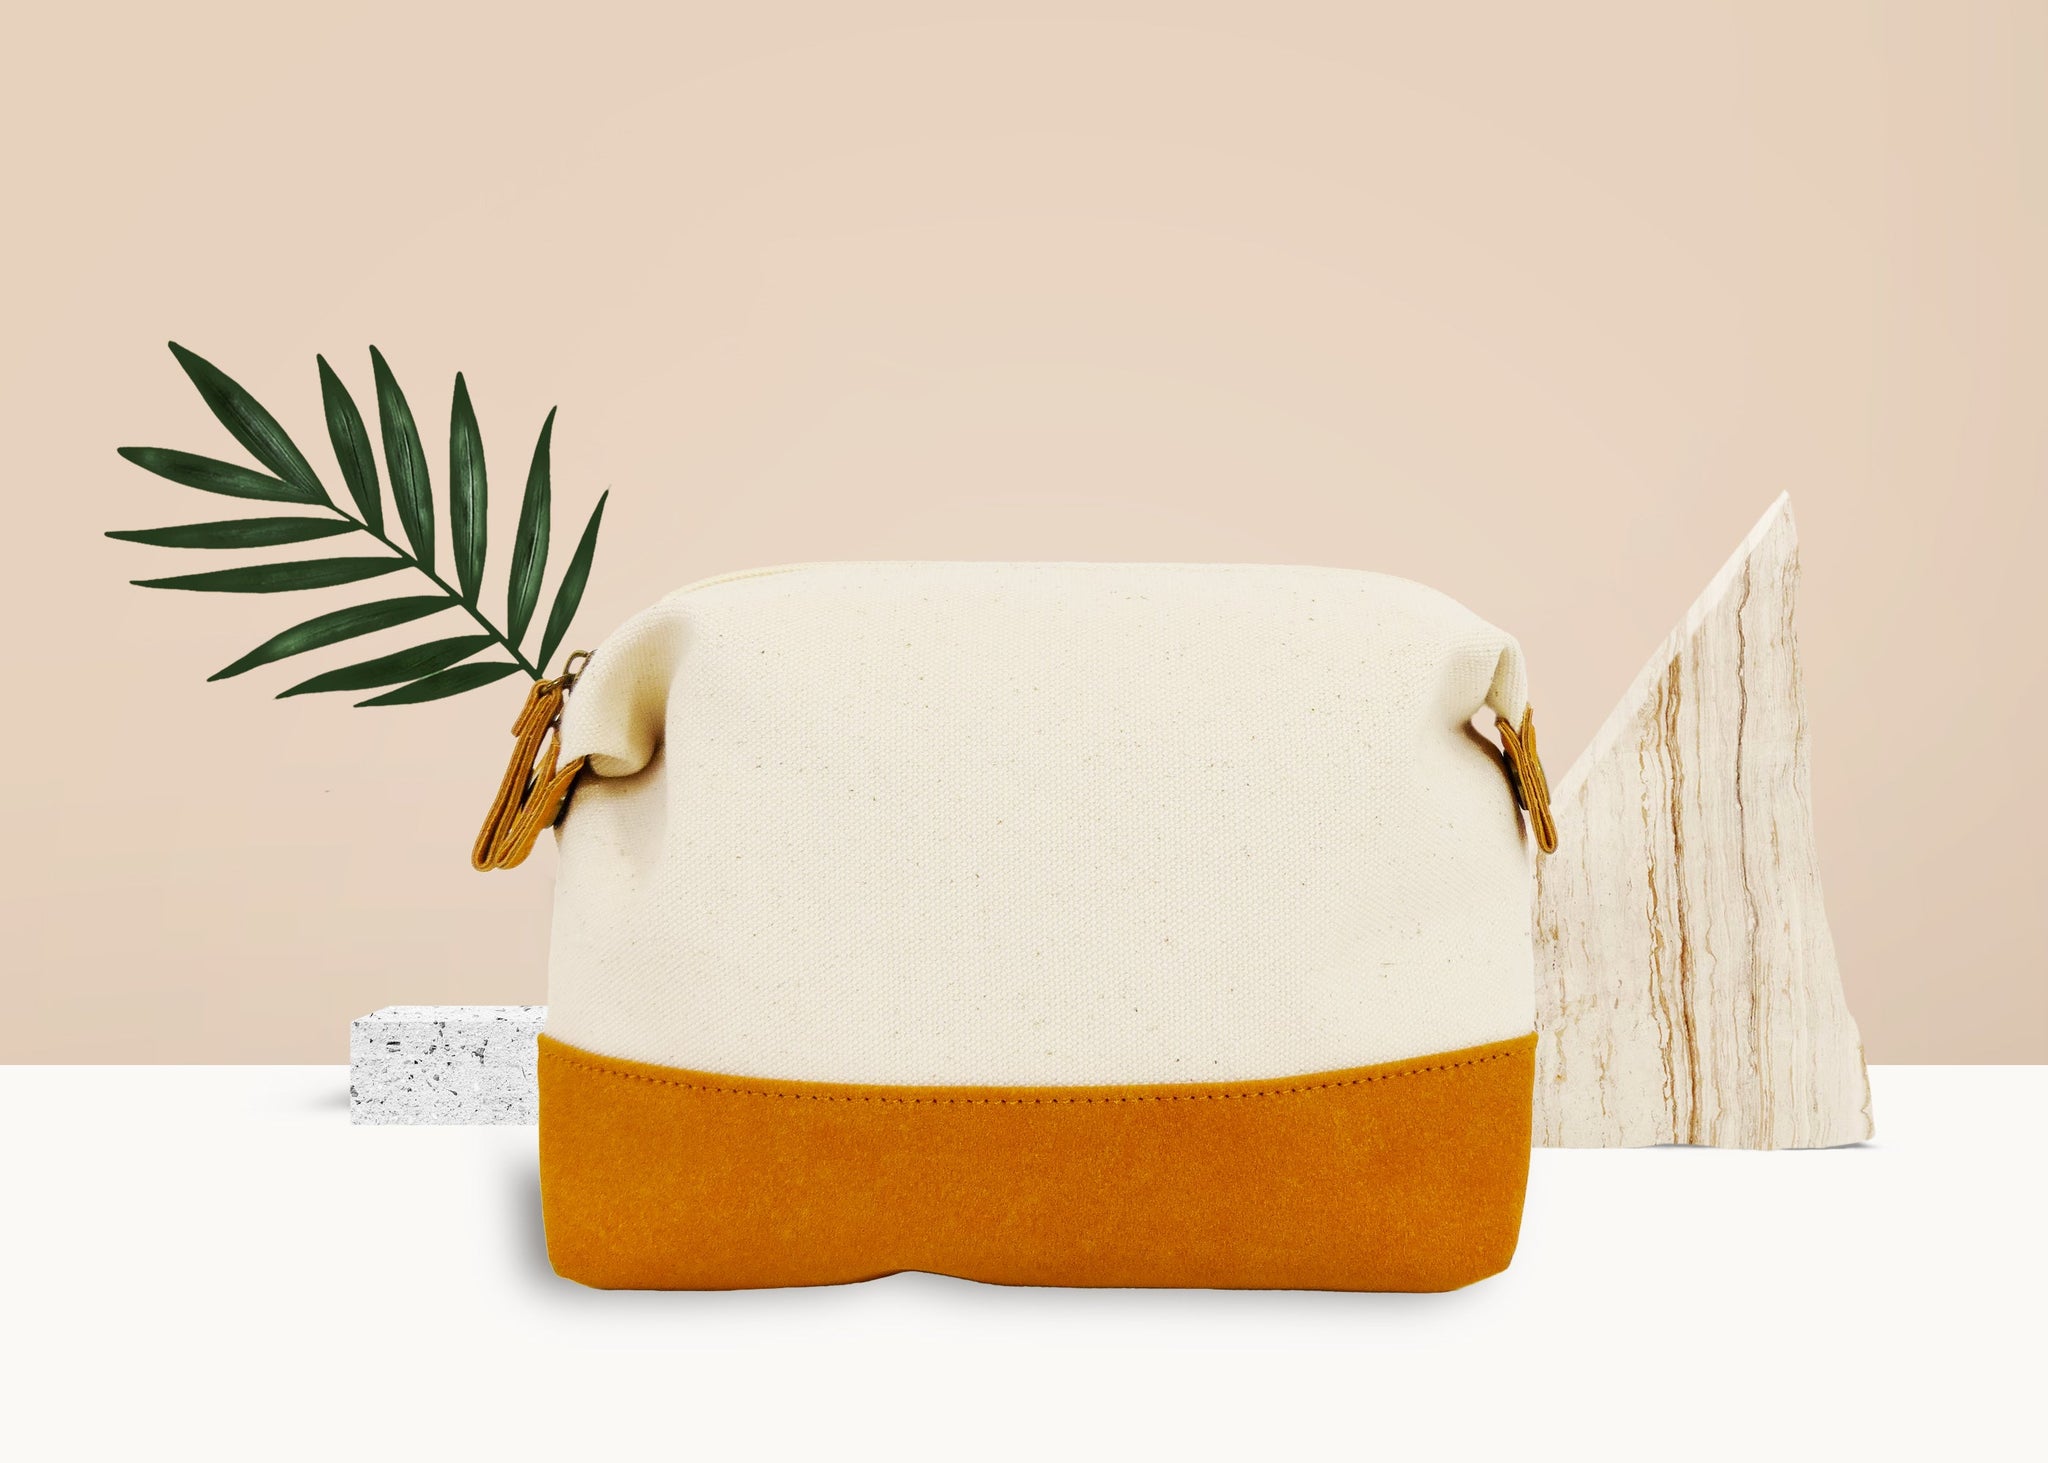 Travel Buddy Toiletry Bag - Bliss Curry/Cream by FourFour Co